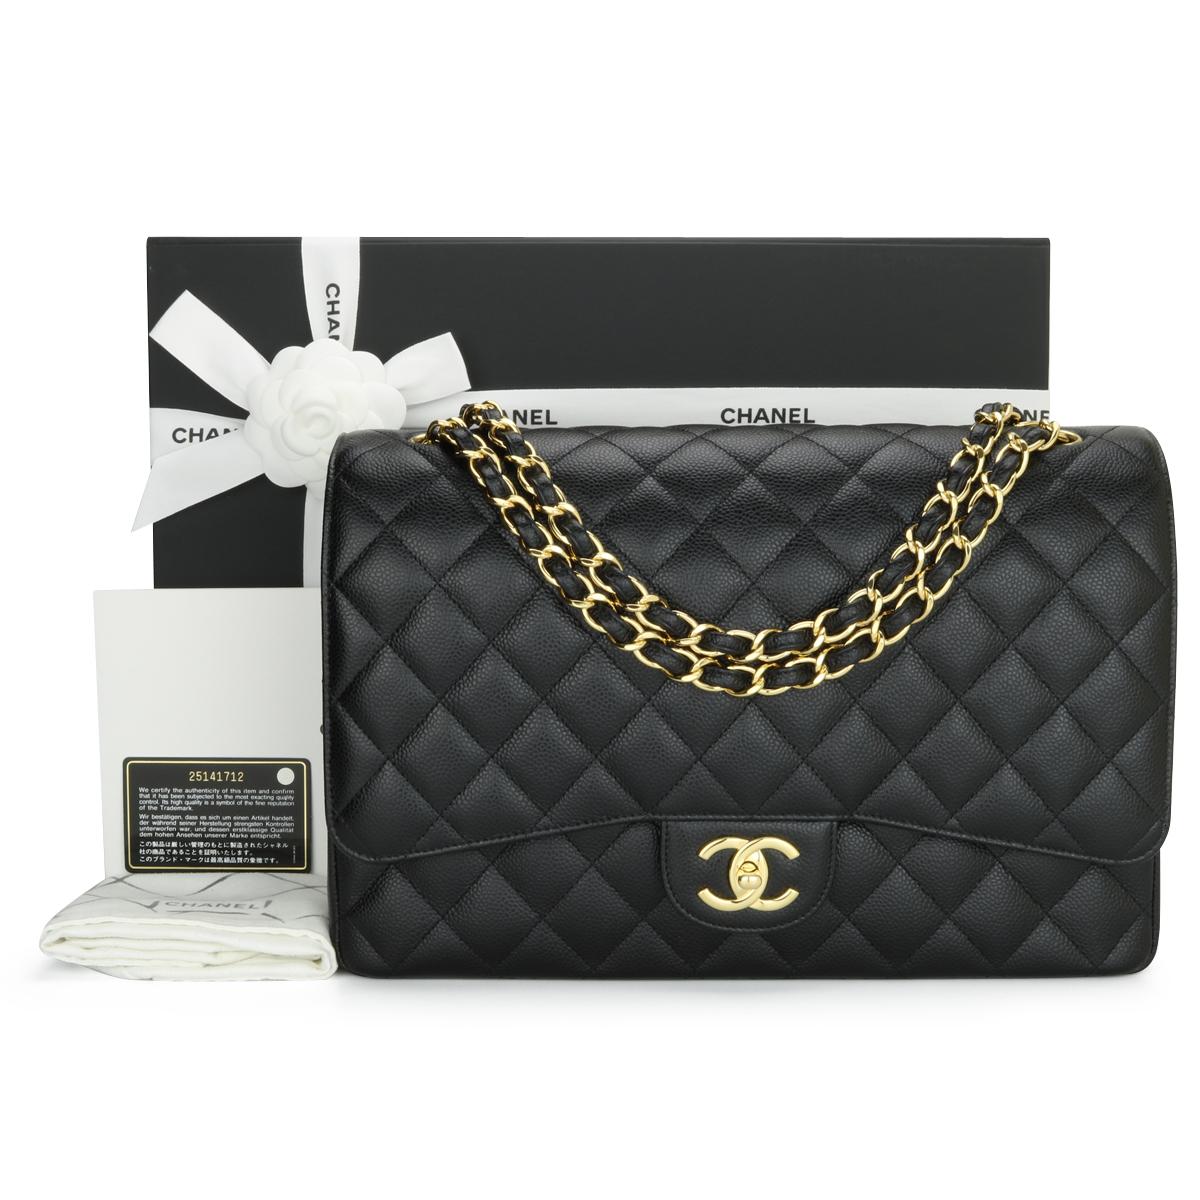 CHANEL Classic Double Flap Maxi Bag Black Caviar with Gold Hardware 2018.

This stunning bag is in never worn condition, the bag still holds its original shape, and the hardware is still very shiny.

- Exterior Condition: Never worn condition.